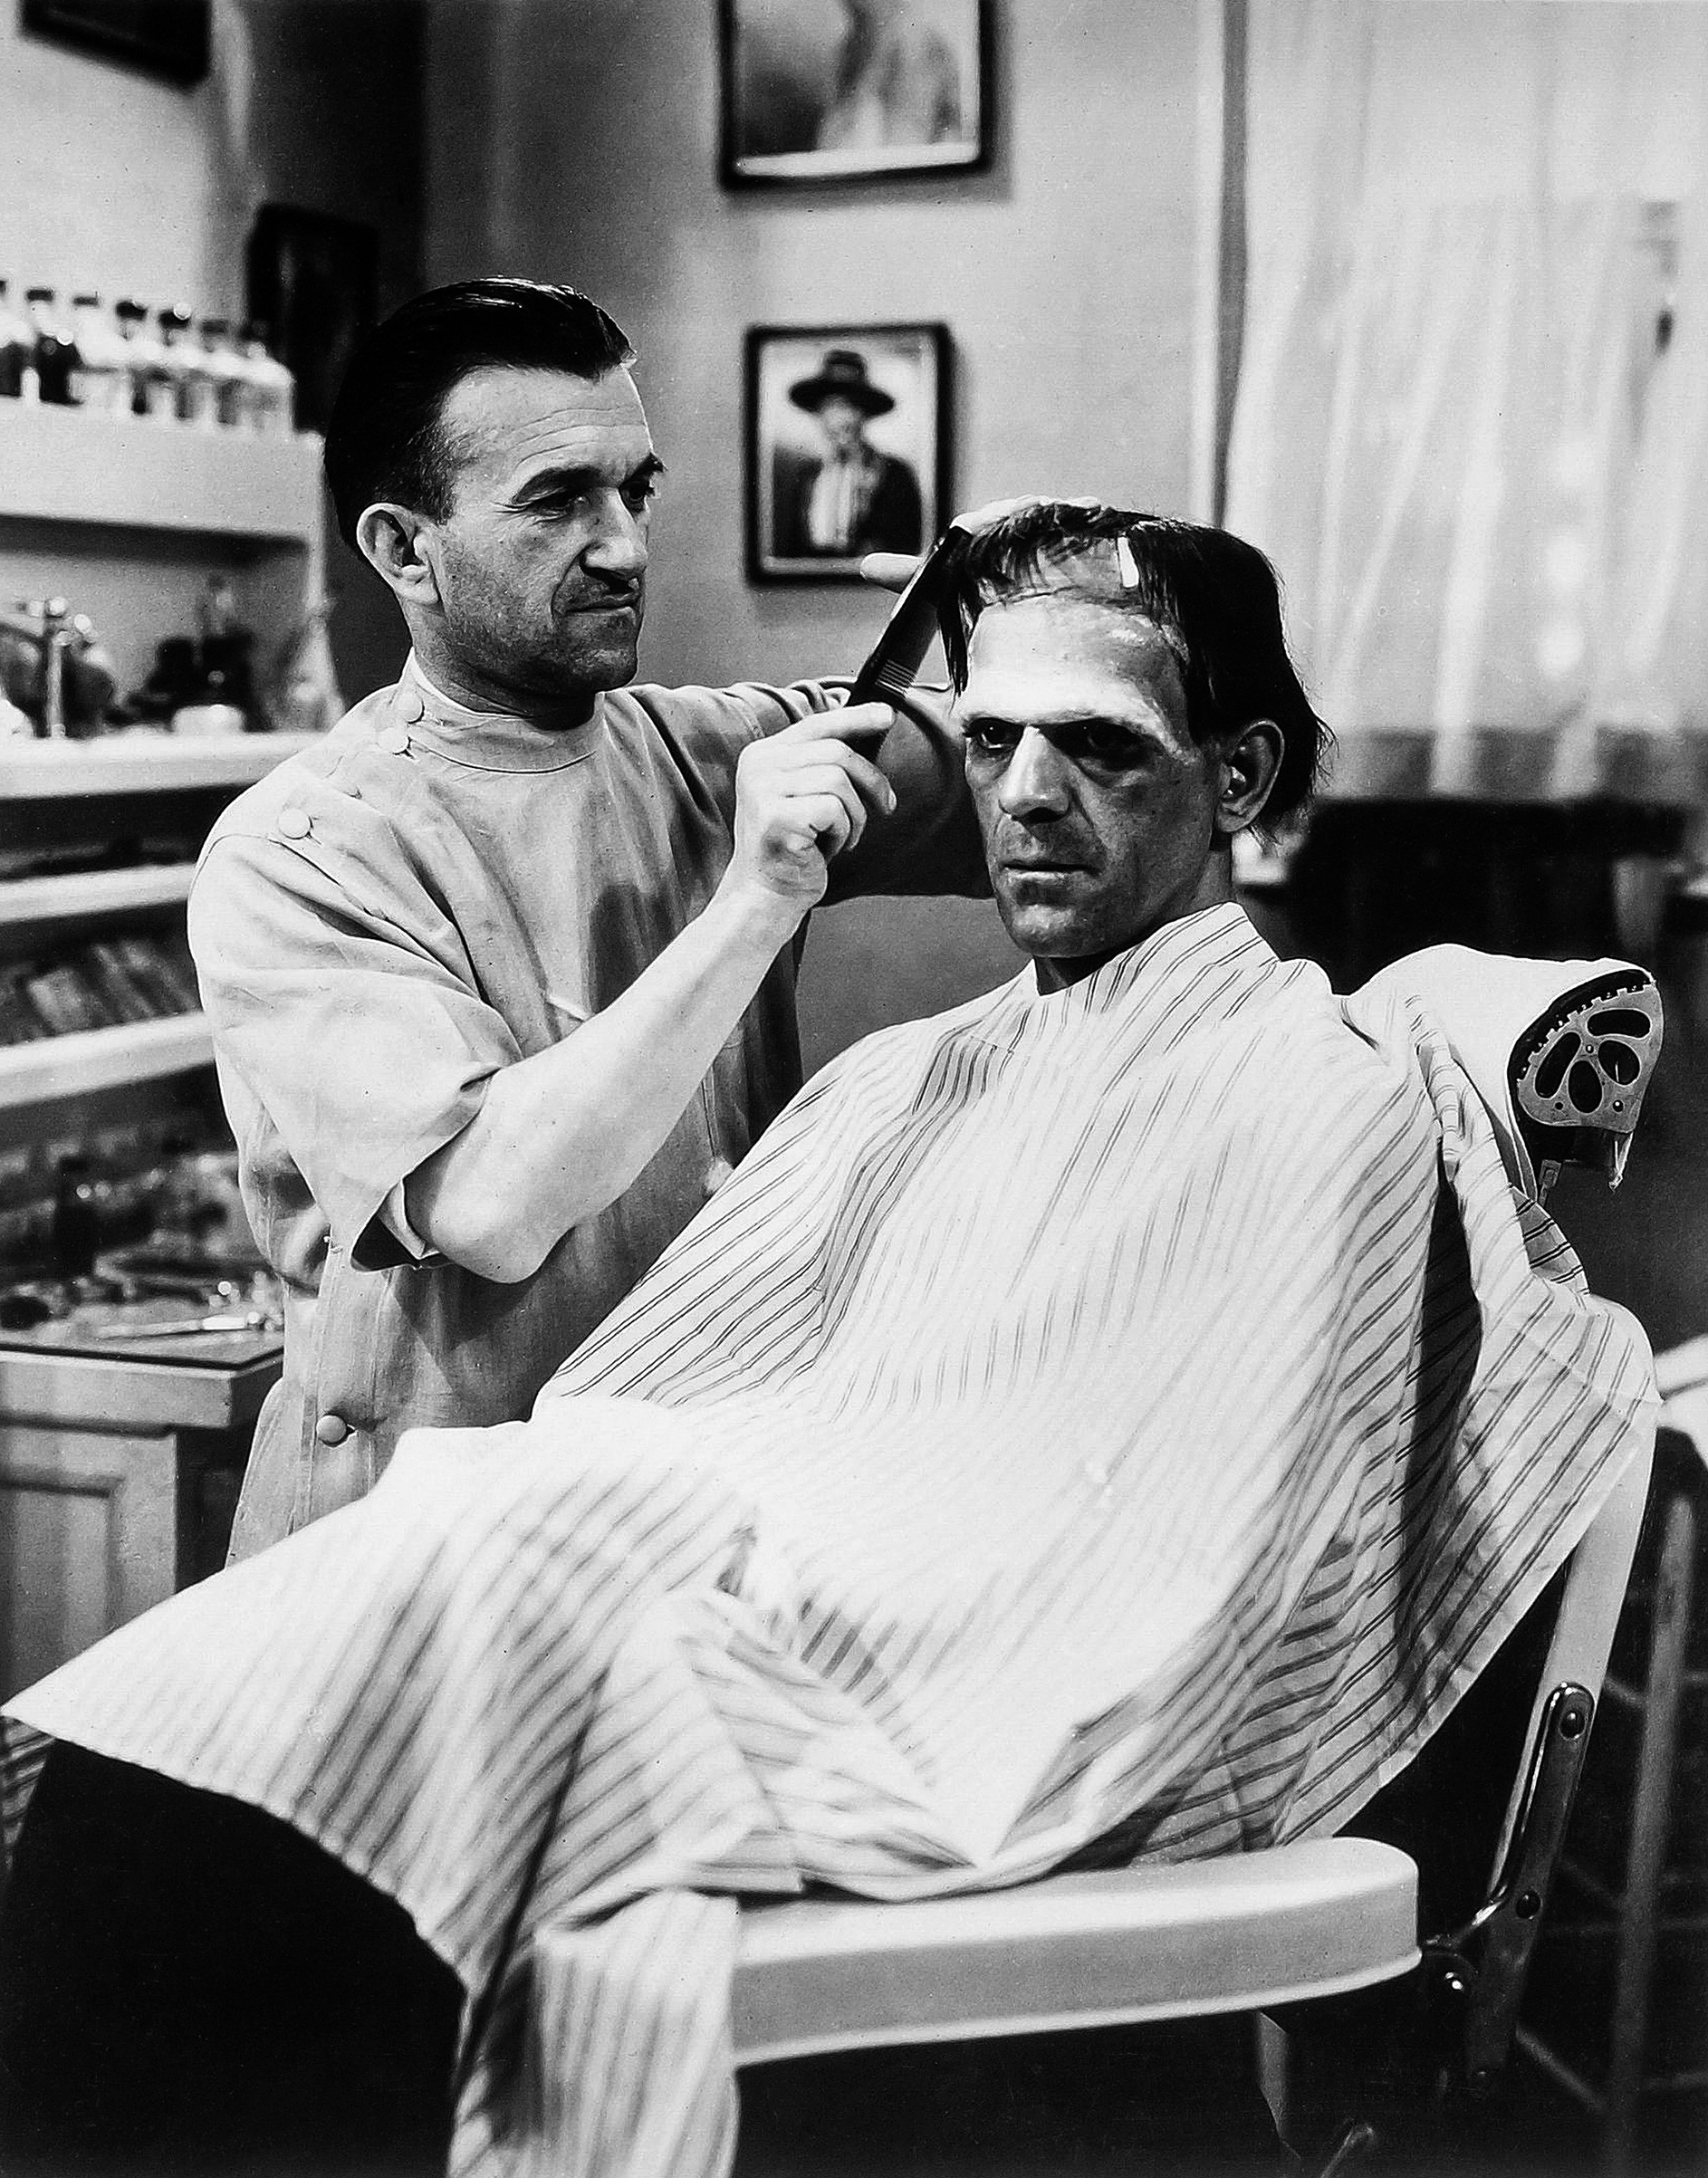 Makeup artist Jack Pierce combs the Monster’s wig: according to Boris Karloff, ‘it took from four to six hours a day to make me up . . .’ (1931).